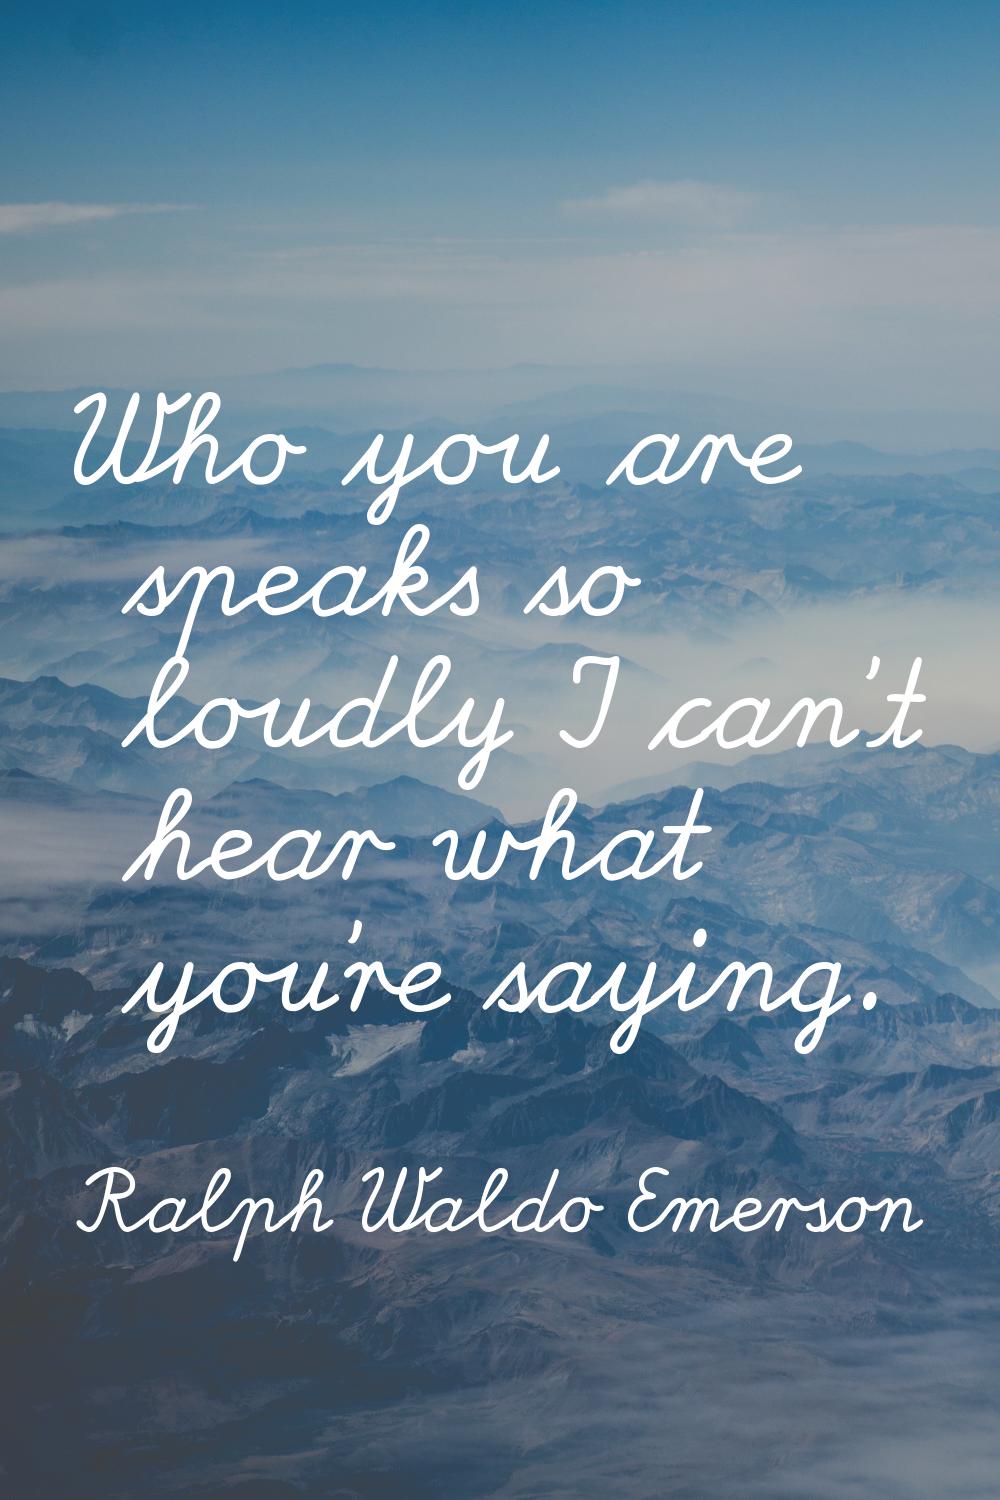 Who you are speaks so loudly I can't hear what you're saying.